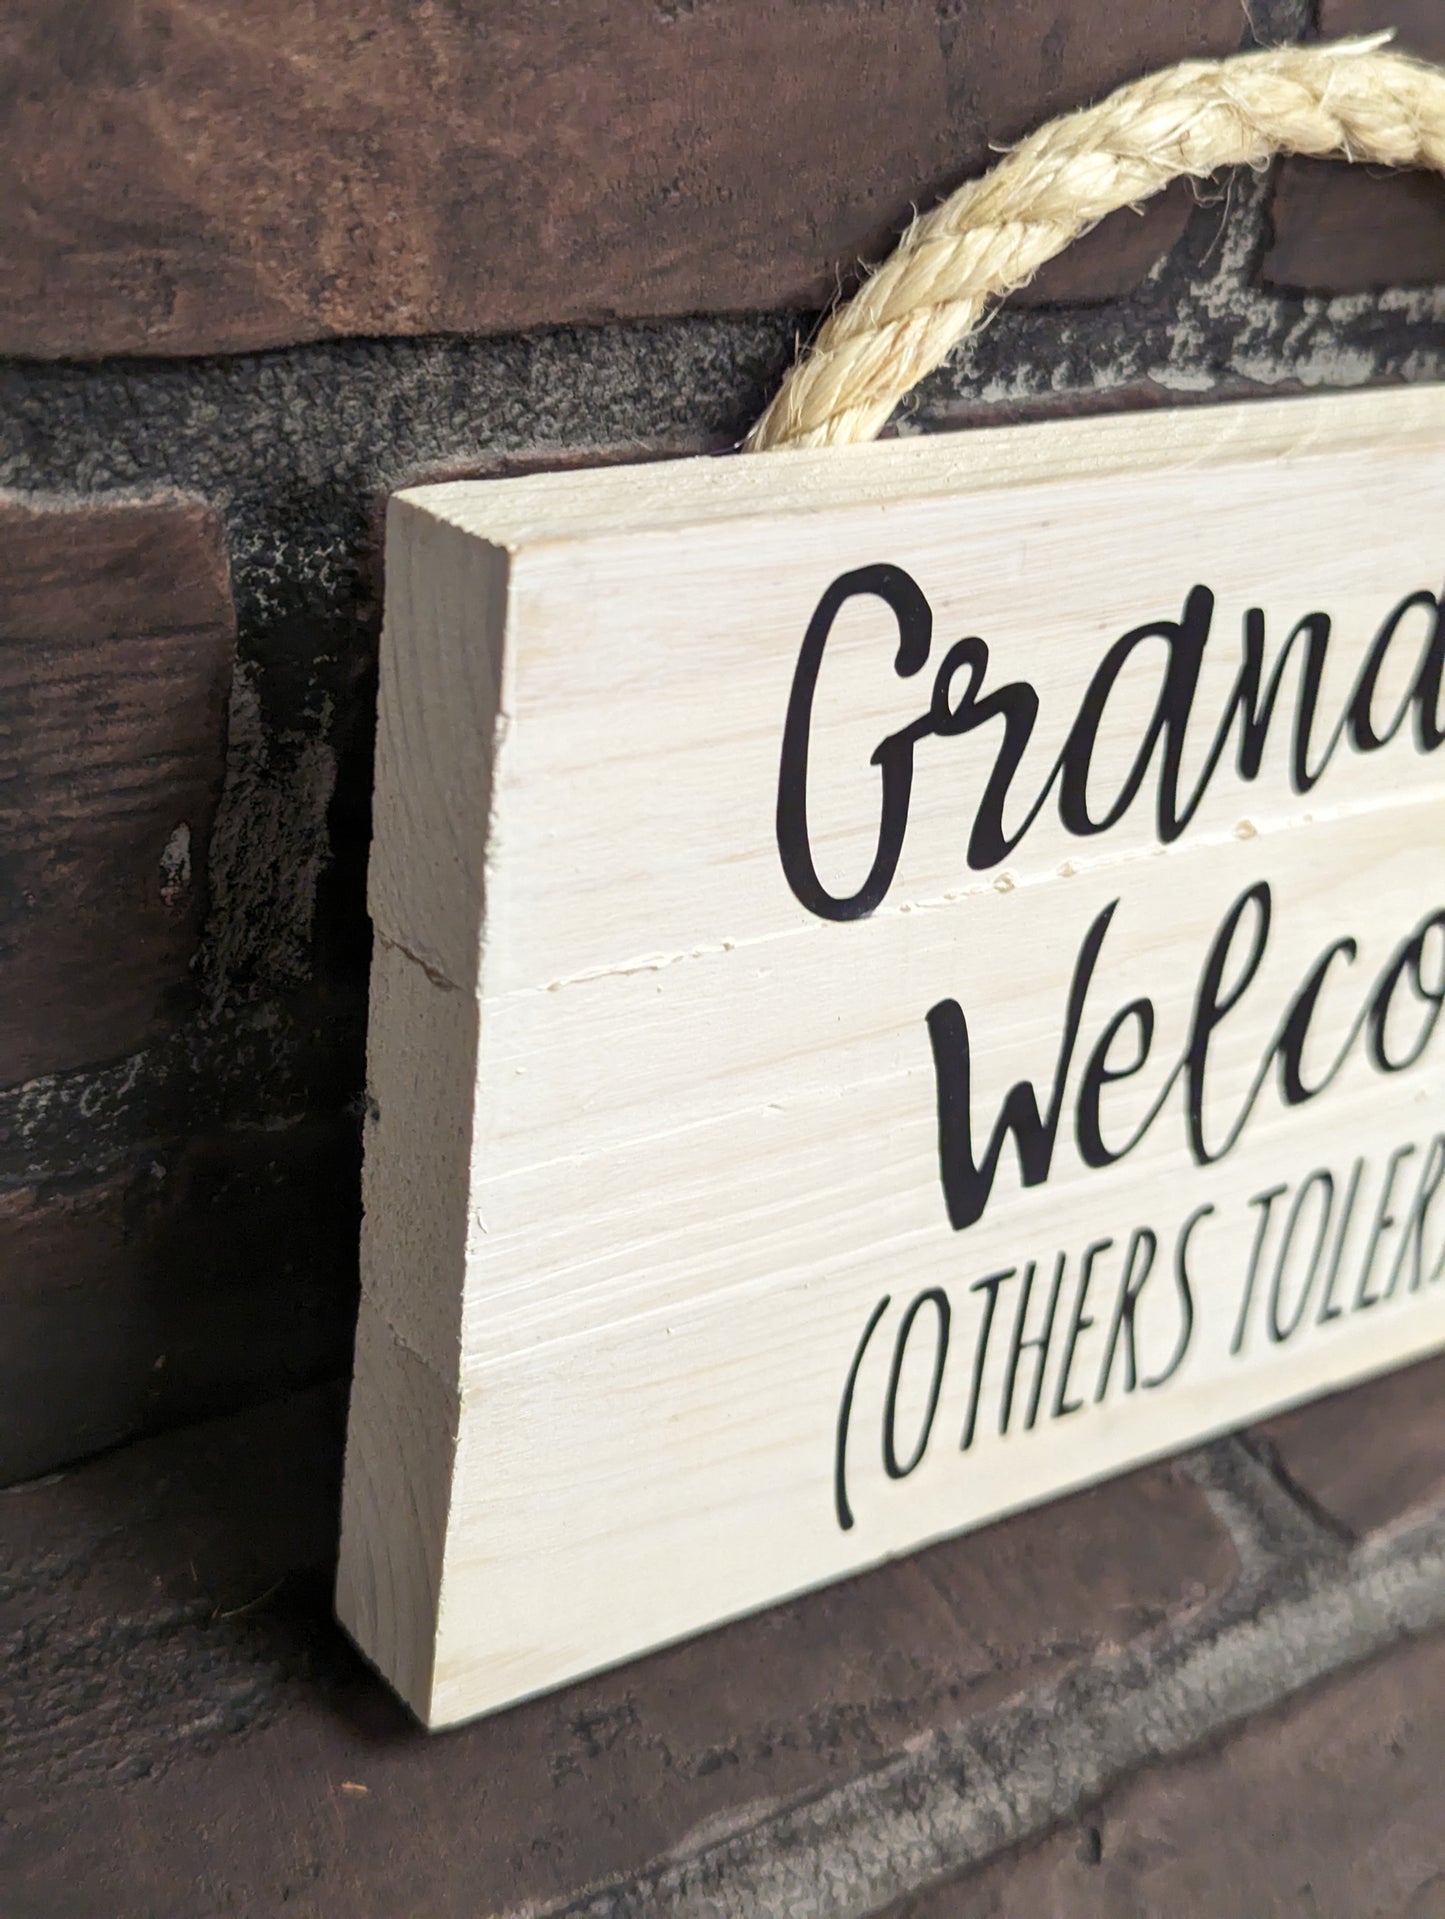 Grandkids Welcome, others tolerated, Wooden Front Door Sign